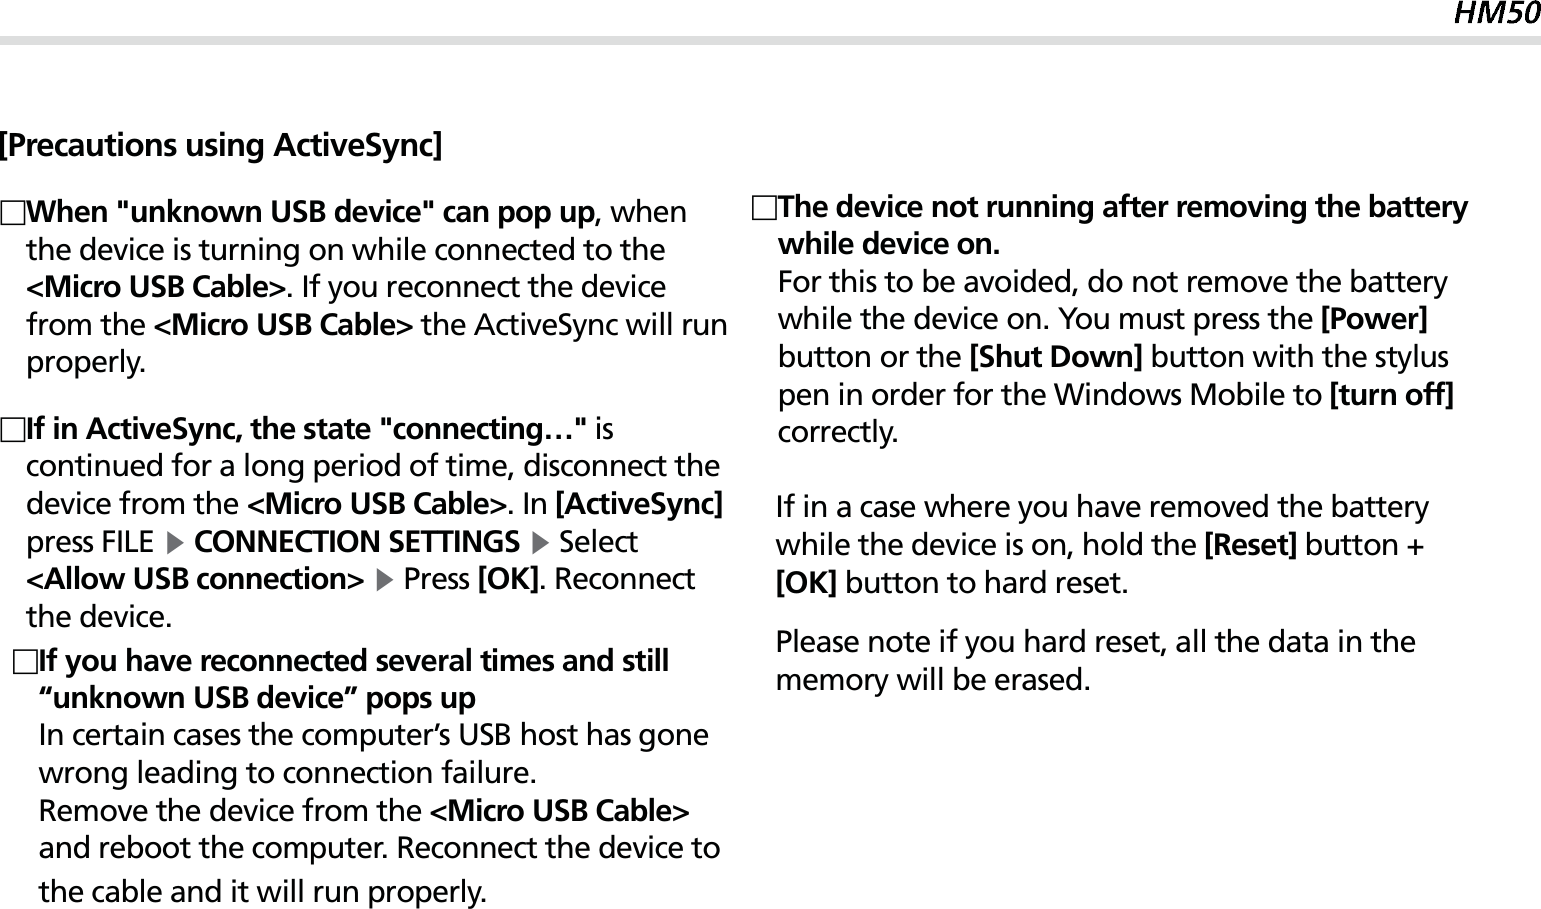 27[Precautions using ActiveSync] When &quot;unknown USB device&quot; can pop up, when the device is turning on while connected to the &lt;Micro USB Cable&gt;. If you reconnect the device from the &lt;Micro USB Cable&gt; the ActiveSync will run properly. If in ActiveSync, the state &quot;connecting…&quot; is continued for a long period of time, disconnect the device from the &lt;Micro USB Cable&gt;. In [ActiveSync] press FILE Ķ CONNECTION SETTINGS Ķ Select &lt;Allow USB connection&gt; Ķ Press [OK]. Reconnect the device. The device not running after removing the battery while device on.For this to be avoided, do not remove the battery while the device on. You must press the [Power] button or the [Shut Down] button with the stylus pen in order for the Windows Mobile to [turn off] correctly.  If in a case where you have removed the battery    while the device is on, hold the [Reset] button +   [OK] button to hard reset.Please note if you hard reset, all the data in the    memory will be erased. If you have reconnected several times and still “unknown USB device” pops up    In certain cases the computer’s USB host has gone wrong leading to connection failure.   Remove the device from the &lt;Micro USB Cable&gt; and reboot the computer. Reconnect the device to the cable and it will run properly.